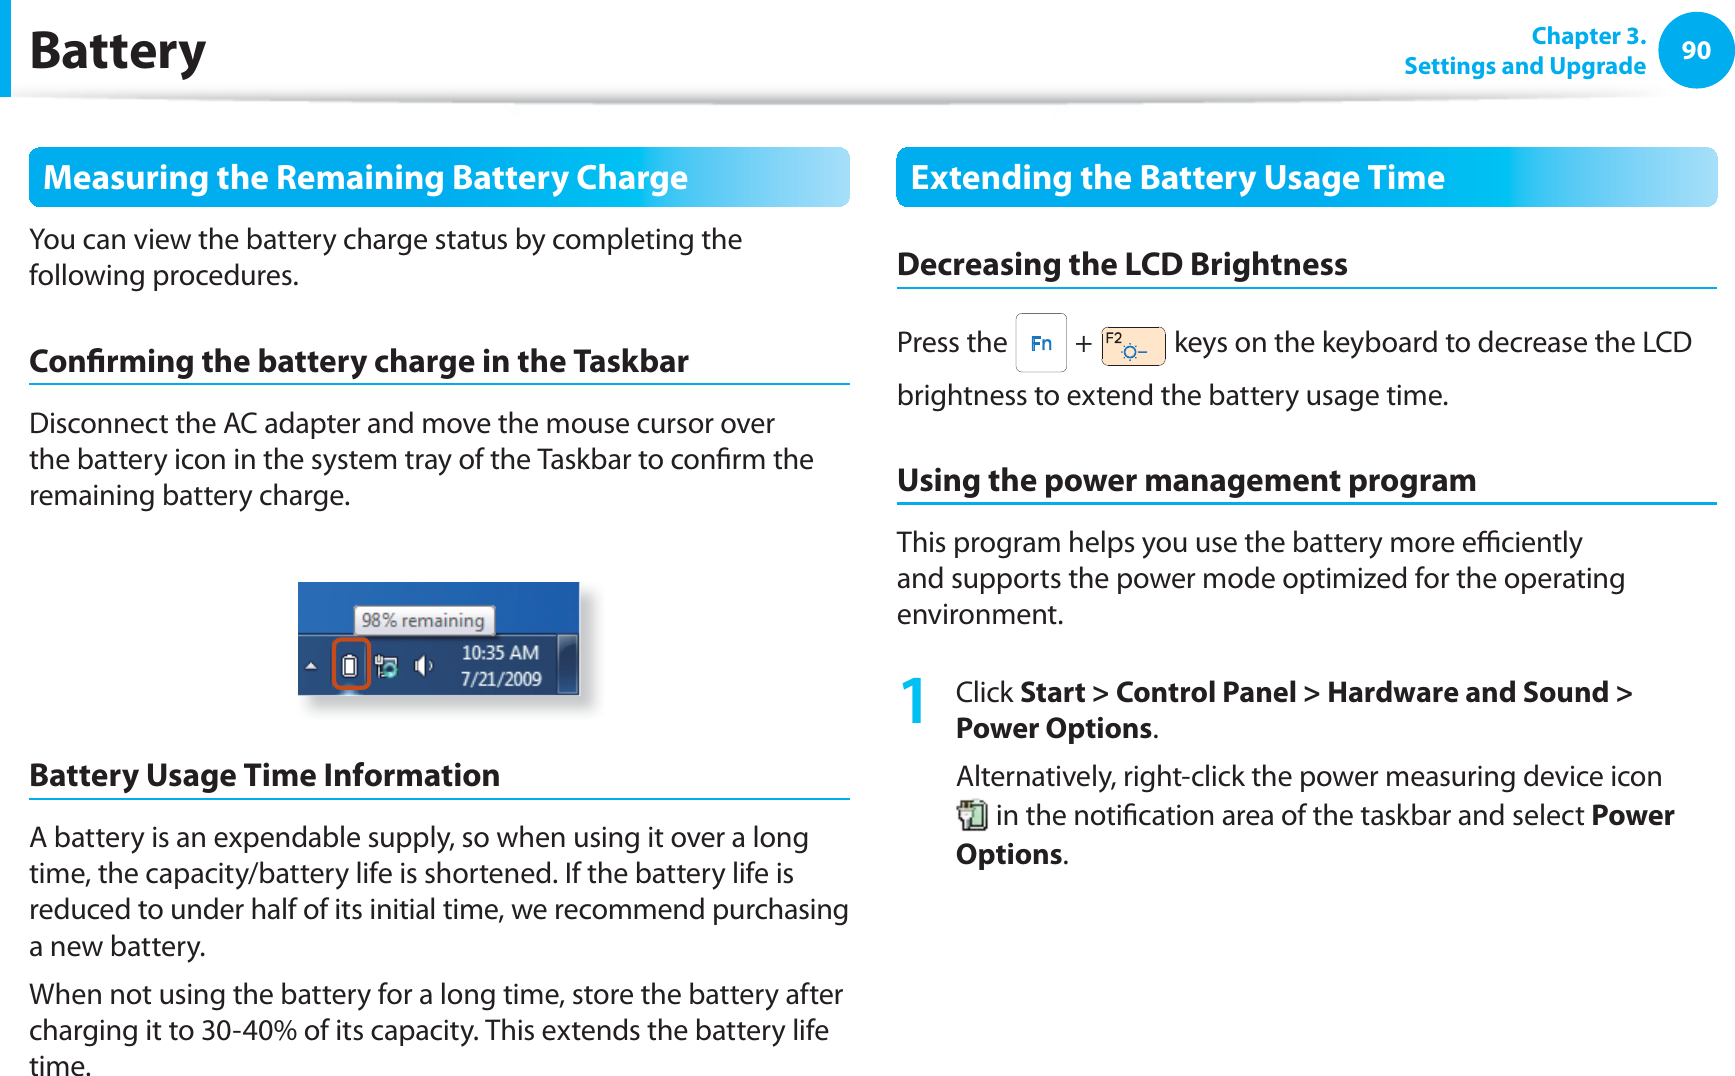 90 Chapter  3.Settings and UpgradeBatteryMeasuring the Remaining Battery ChargeYou can view the battery charge status by completing the following procedures.Con rming the battery charge in the TaskbarDisconnect the AC adapter and move the mouse cursor over the battery icon in the system tray of the Taskbar to con rm the remaining battery charge.Battery Usage Time InformationA battery is an expendable supply, so when using it over a long time, the capacity/battery life is shortened. If the battery life is reduced to under half of its initial time, we recommend purchasing a new battery.When not using the battery for a long time, store the battery after charging it to 30-40% of its capacity. This extends the battery life time.Extending the Battery Usage TimeDecreasing the LCD BrightnessPress the   +   keys on the keyboard to decrease the LCD brightness to extend the battery usage time.Using the power management programThis program helps you use the battery more e  ciently and supports the power mode optimized for the operating environment.1 Click Start &gt; Control Panel &gt; Hardware and Sound &gt; Power Options.Alternatively, right-click the power measuring device icon  in the noti cation area of the taskbar and select Power Options.